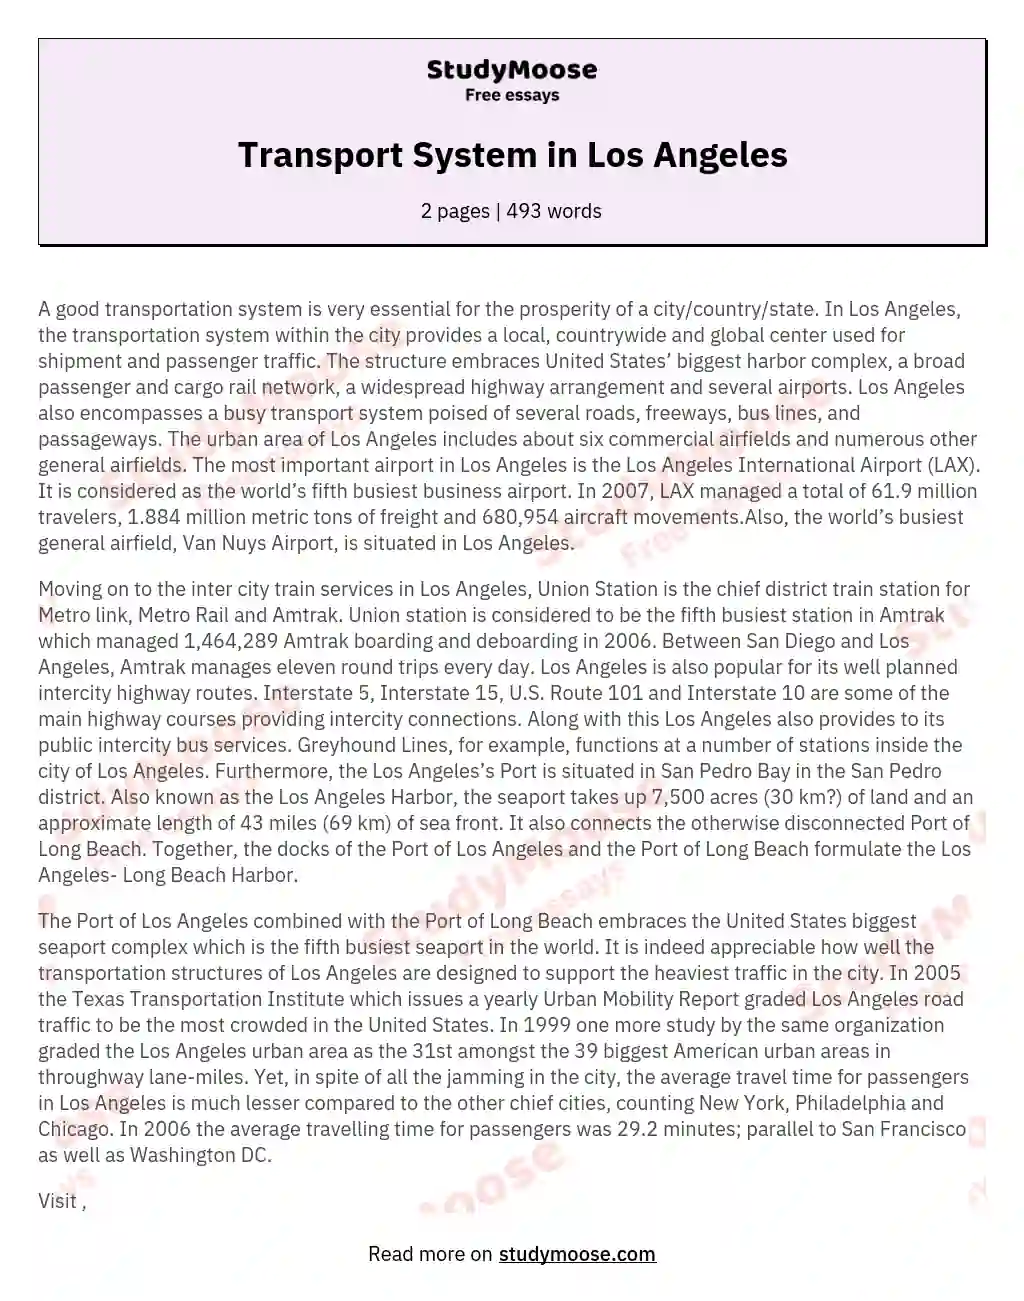 Transport System in Los Angeles